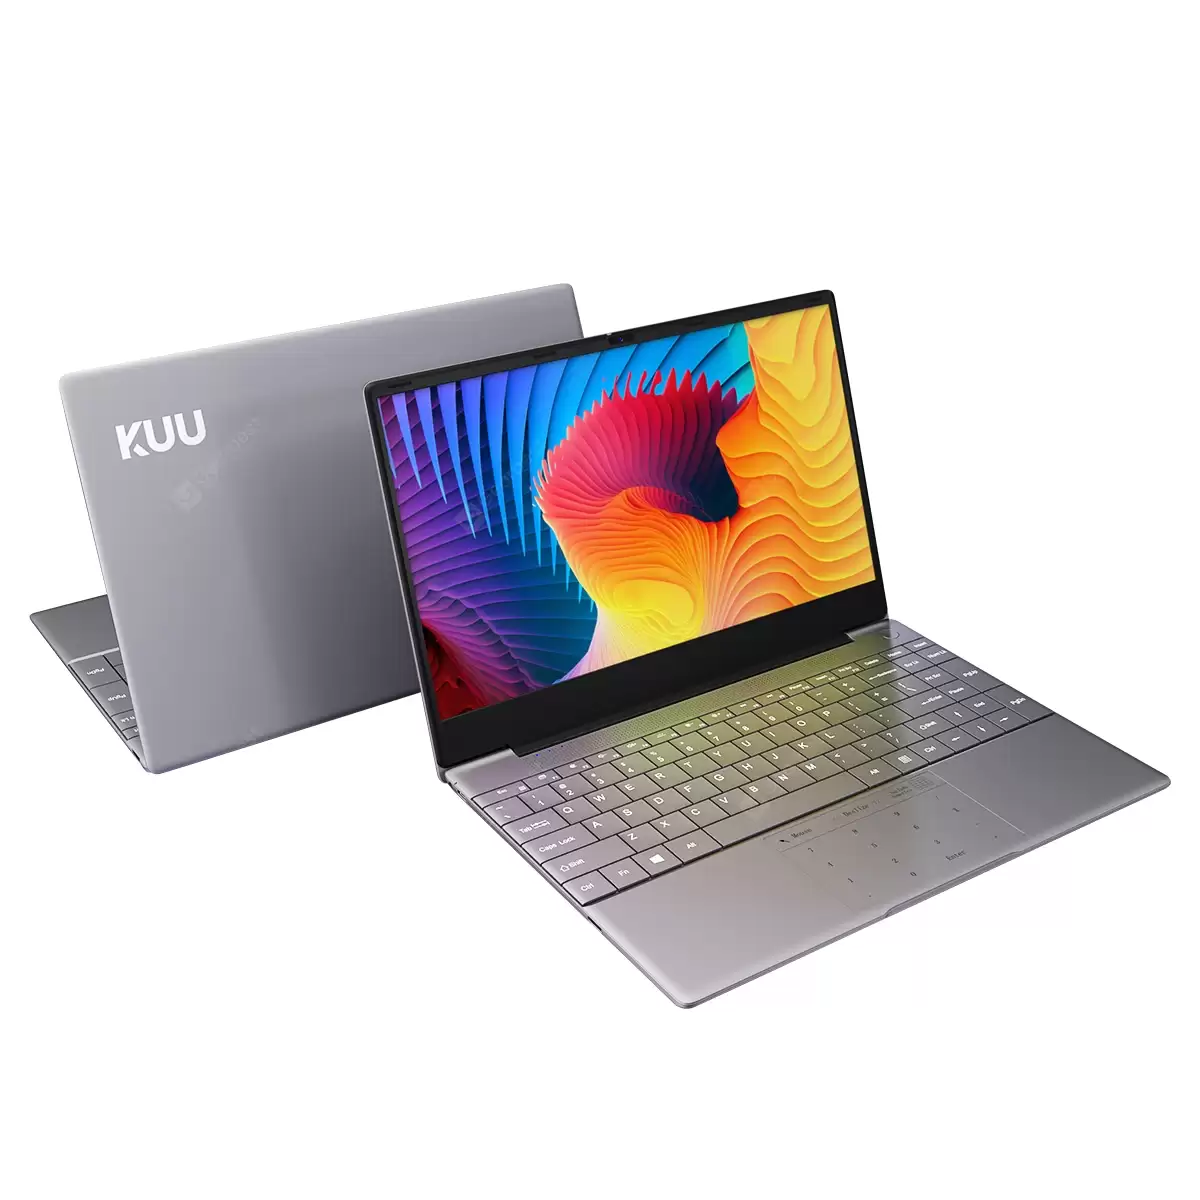 Order In Just $407.52 Kuu K2s Intel Celeron J4115 Processor 14.1-inch Ips Screen All Metal Shell Office Notebook 8gb Ram Windows 10 128gb/256gb/512gb Ssd - 256gb Germany (entrepot Eu), 5%commissions At Gearbest With This Coupon